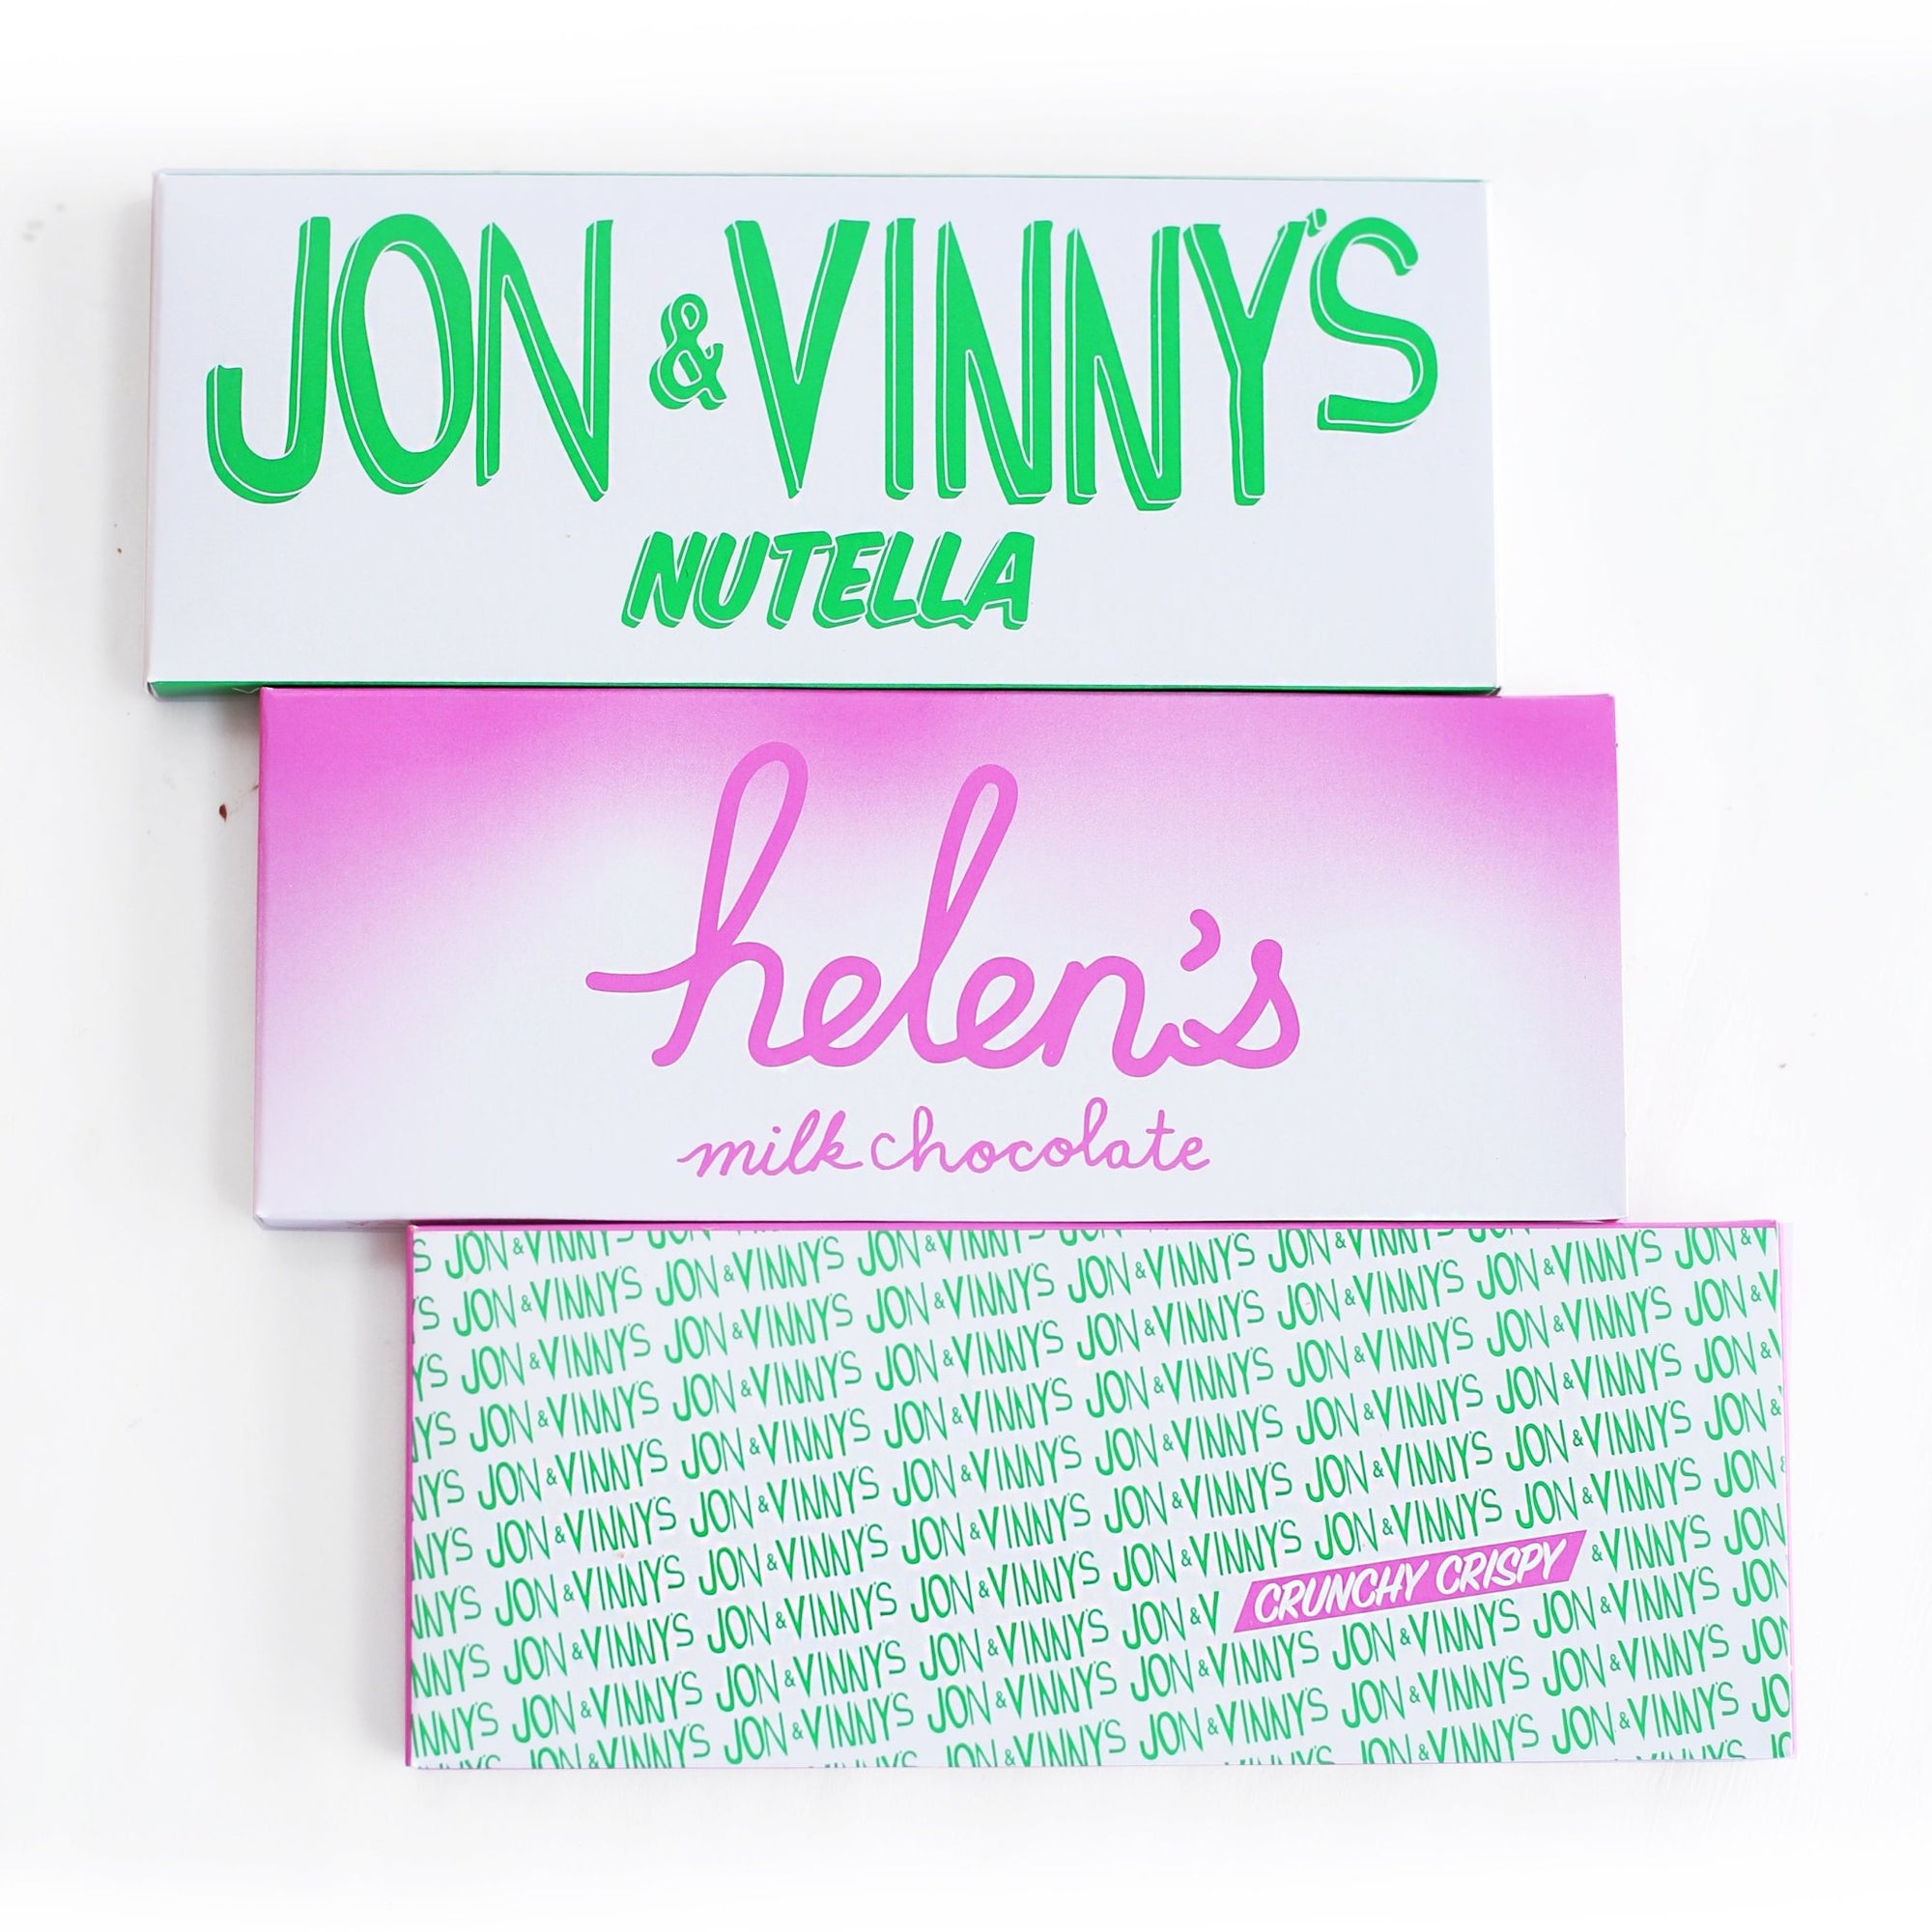  Three chocolate bar wrappers from Jon & Vinny and Helen and Valerie Milk Chocolate Bar Gift Set. From top to bottom: "JON & VINNY'S NUTELLA" in green on white, "helen's milk chocolate" in pink on a pink-to-white gradient, and "JON & VINNY'S CRUNCHY CRISPY" in green on white with a pink highlight.